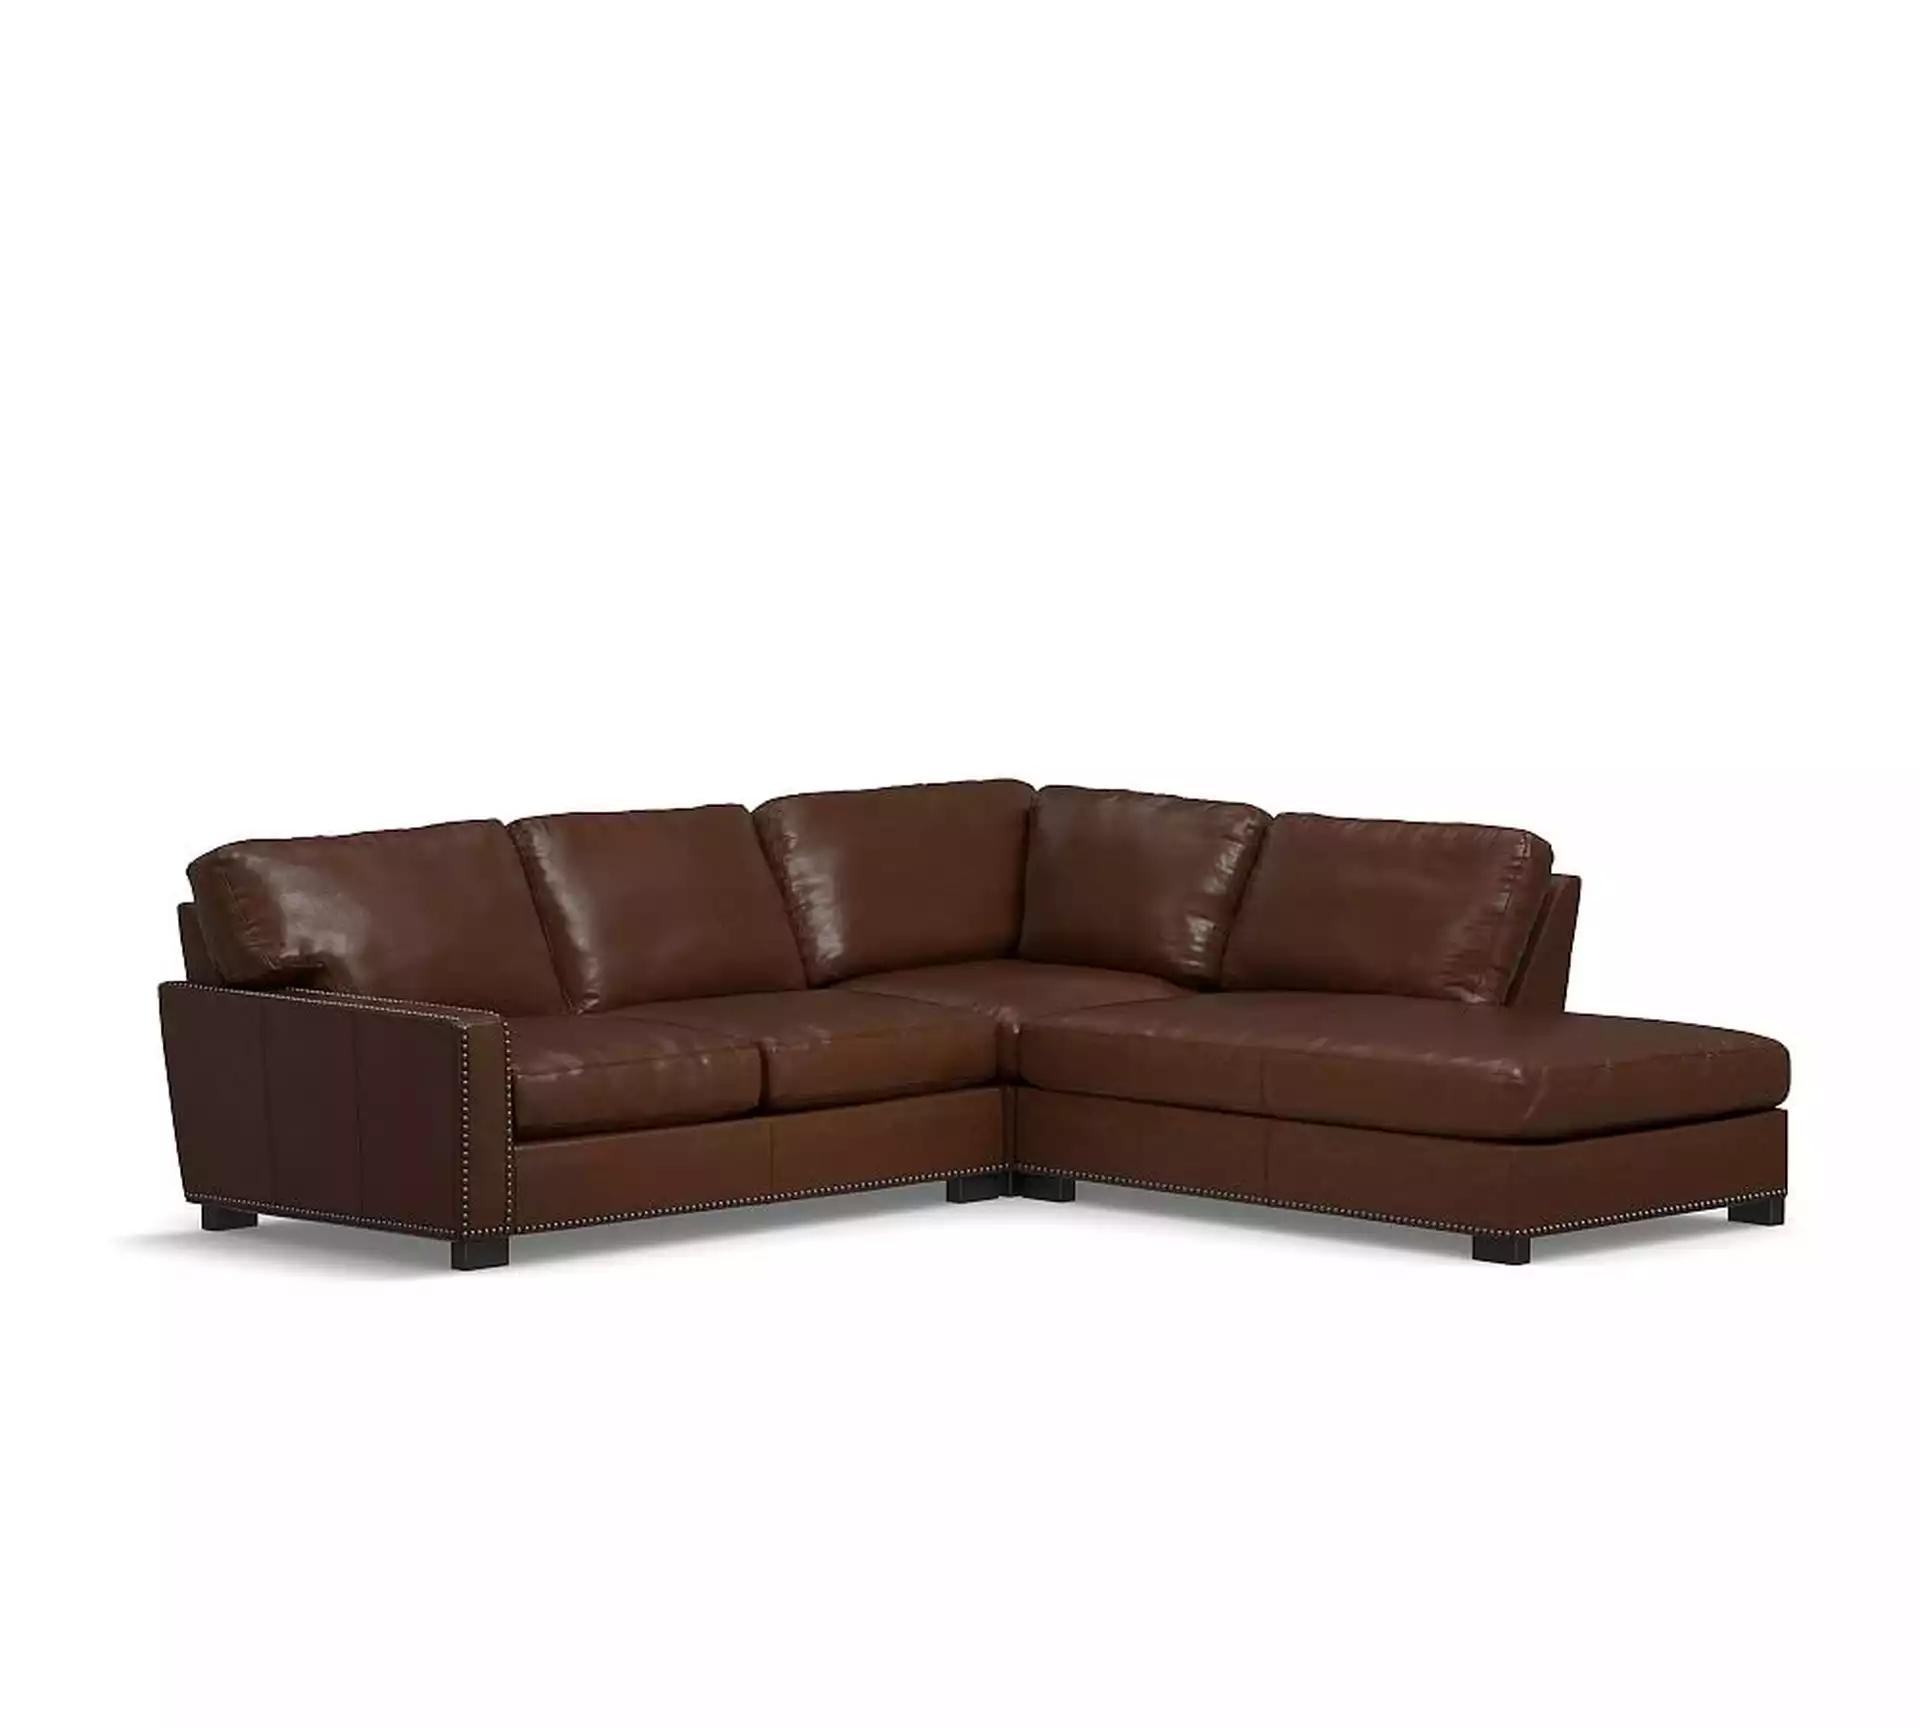 Turner Square Arm Leather Left 3-Piece Bumper Sectional with Bronze Nailheads, Down Blend Wrapped Cushions Churchfield Chocolate